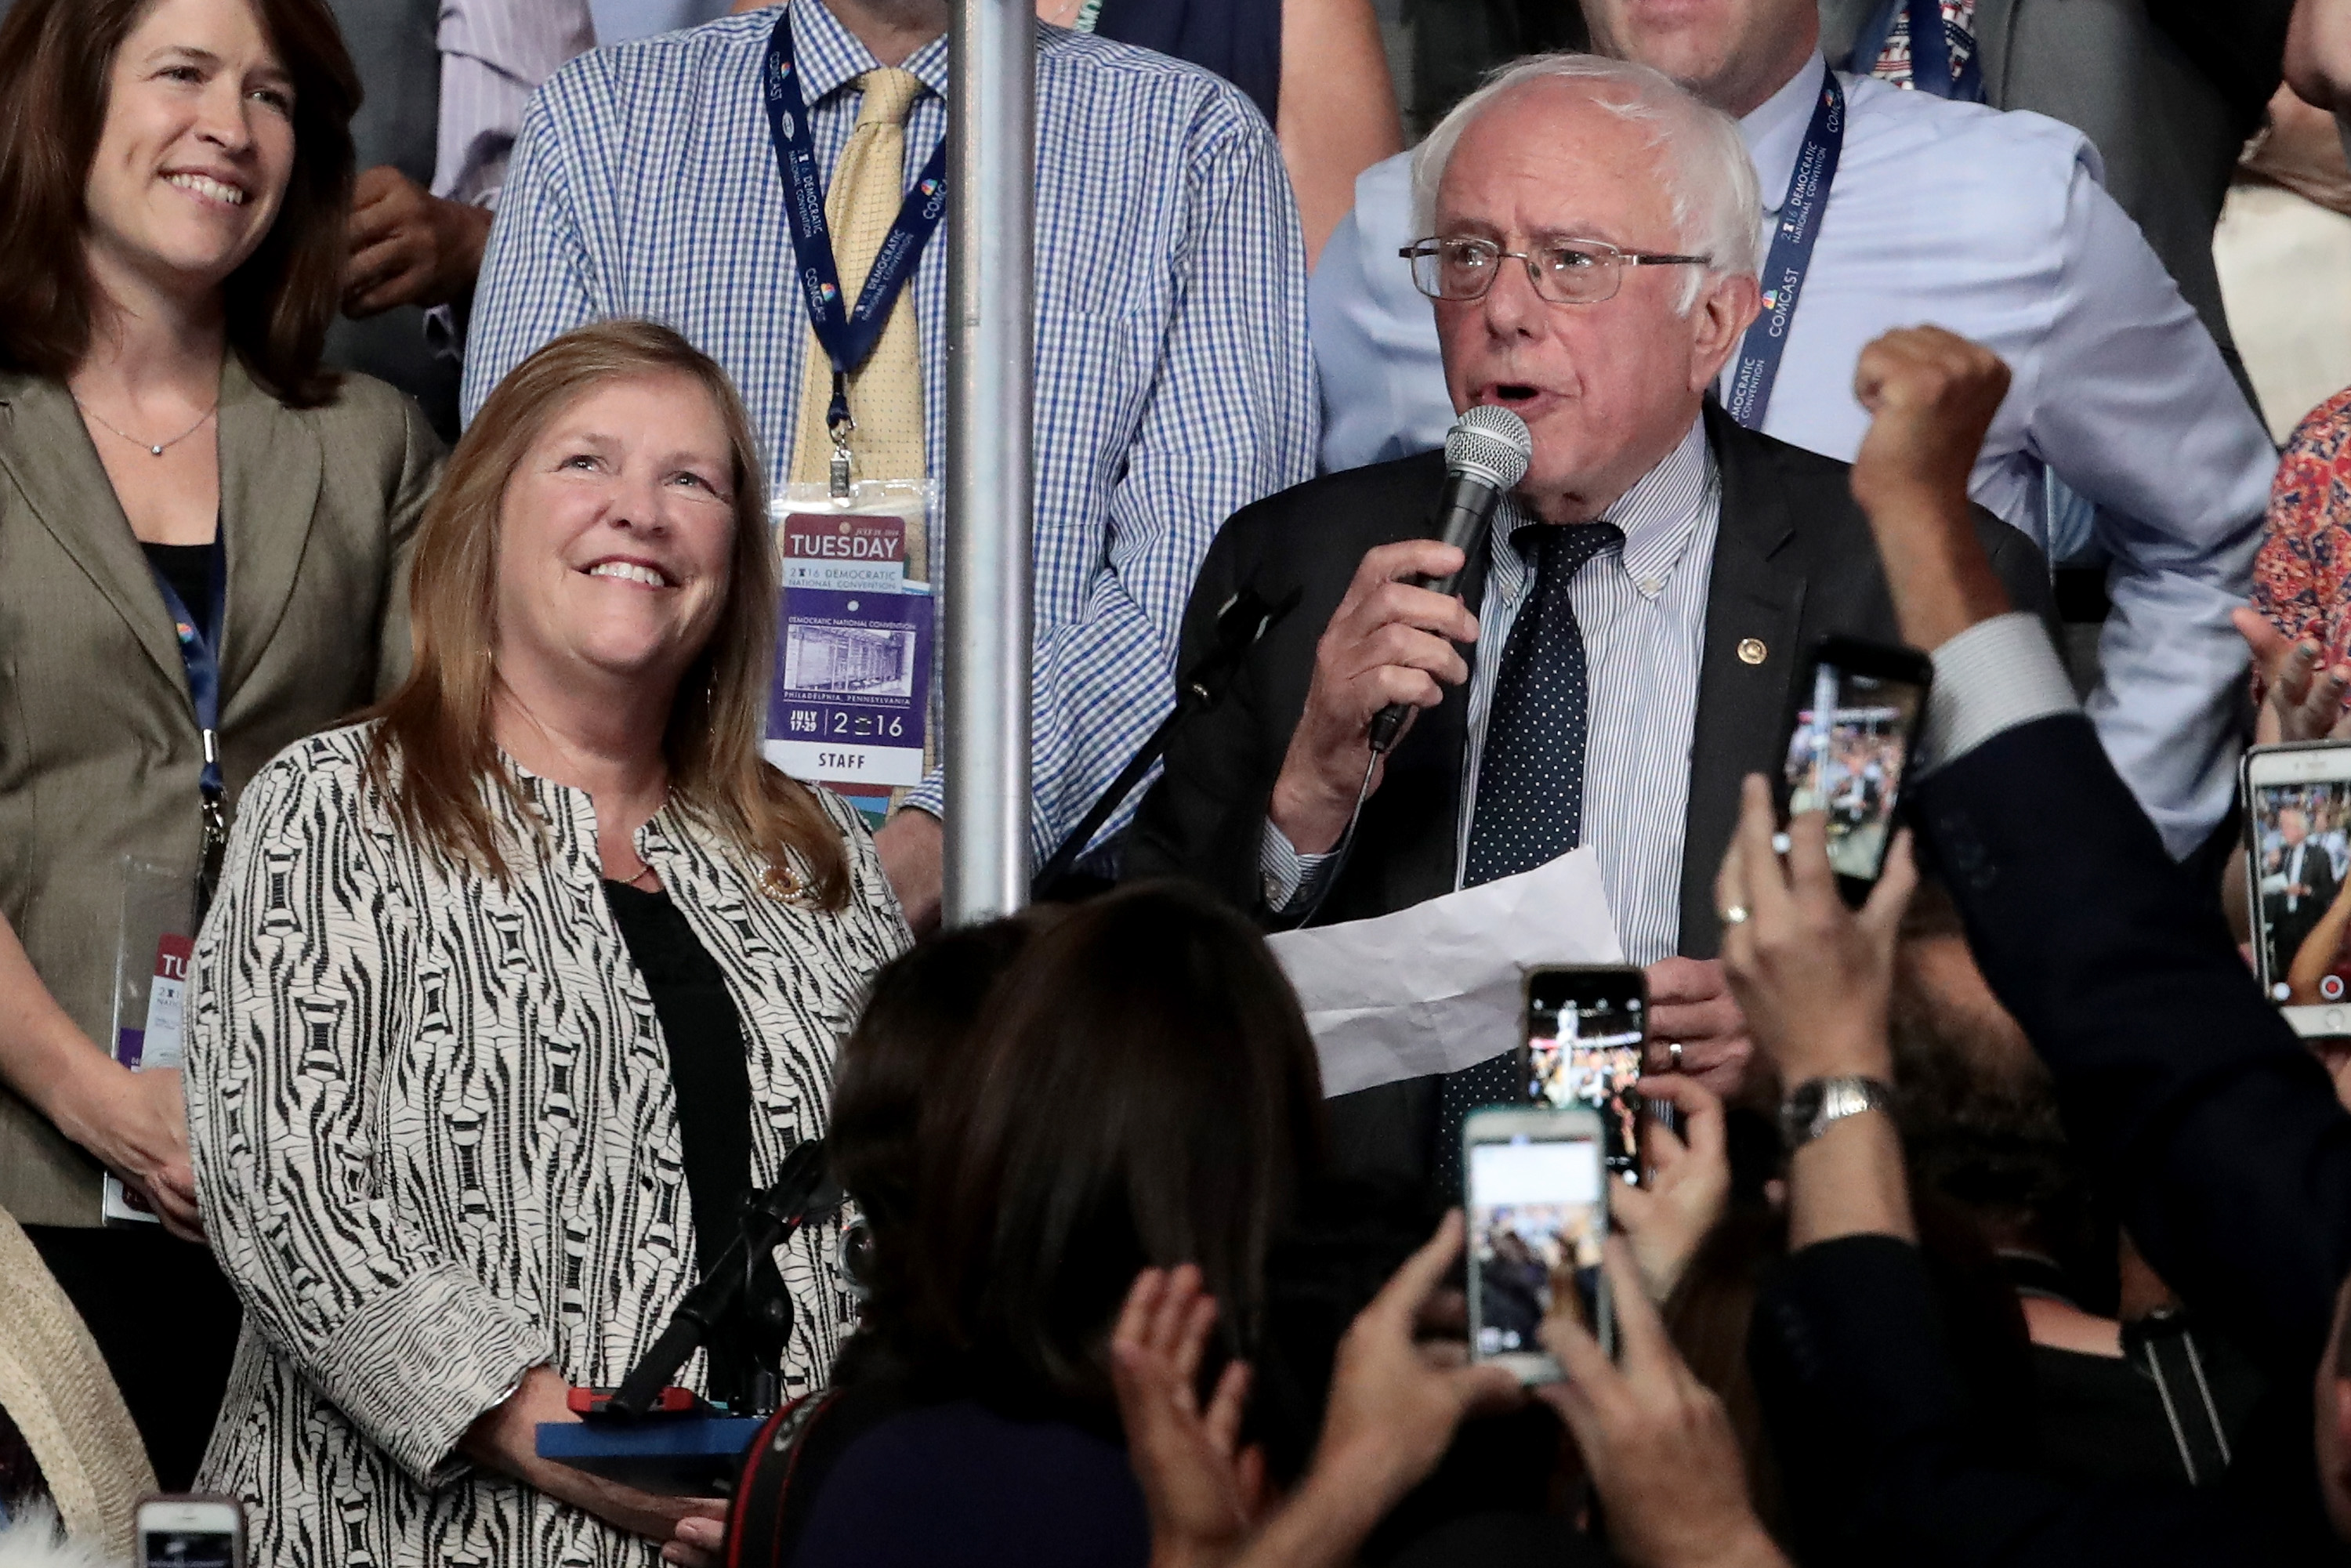 PHILADELPHIA, PA - JULY 26: Sen. Bernie Sanders (R) along with the Vermont delegation and his wife Jane O'Meara Sanders (L) cast their votes during roll call on the second day of the Democratic National Convention at the Wells Fargo Center, July 26, 2016 in Philadelphia, Pennsylvania. Democratic presidential candidate Hillary Clinton received the number of votes needed to secure the party's nomination. An estimated 50,000 people are expected in Philadelphia, including hundreds of protesters and members of the media. The four-day Democratic National Convention kicked off July 25.   Drew Angerer/Getty Images/AFP